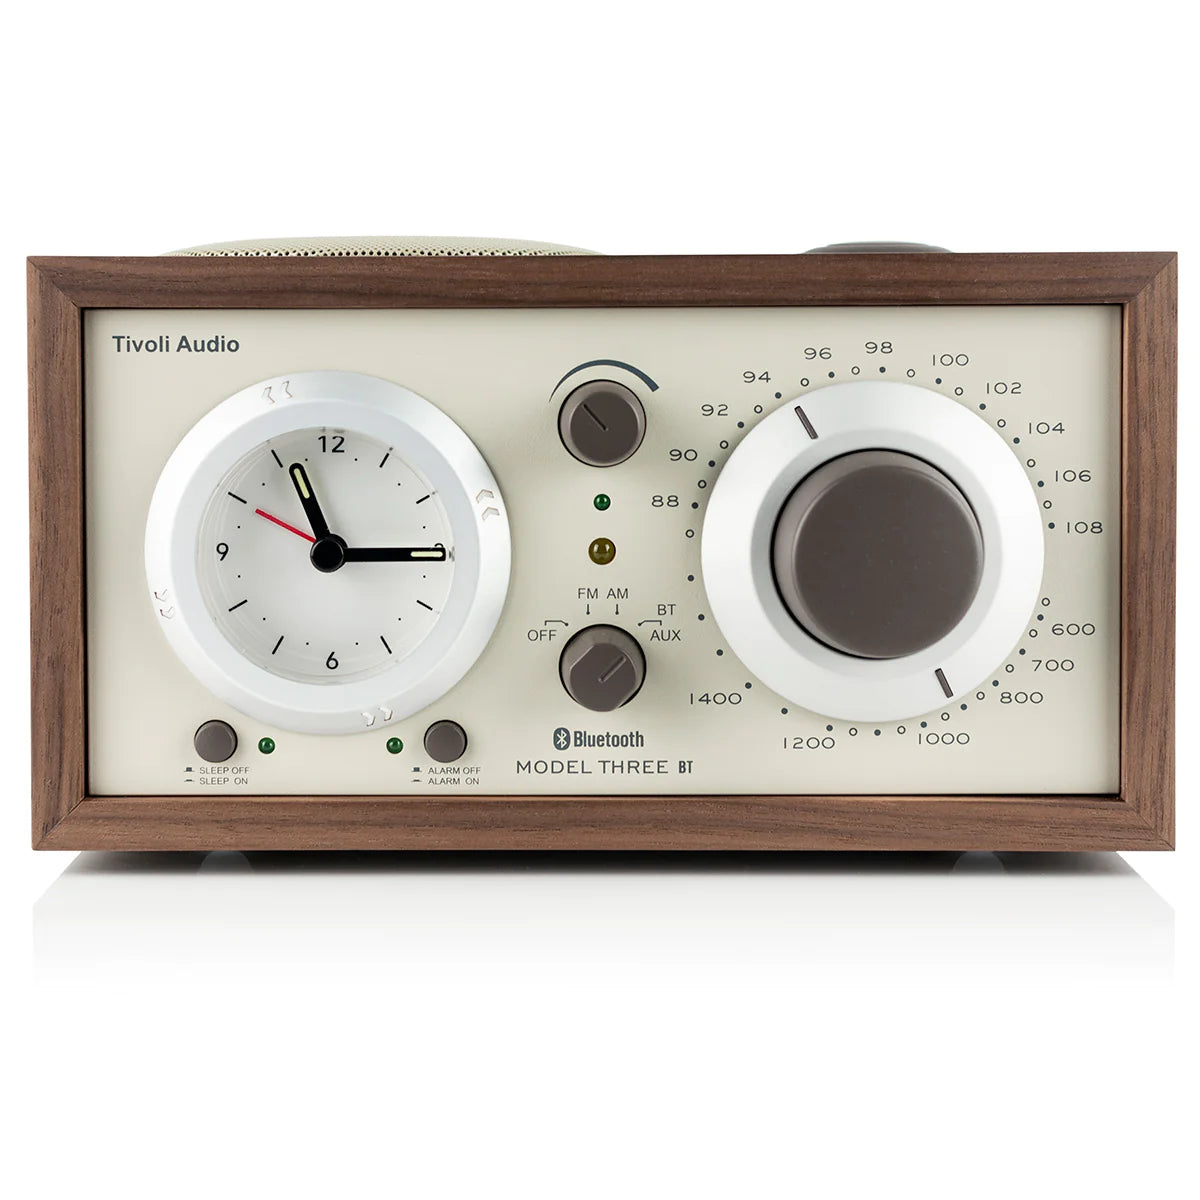 The Tivoli Audio Model Three BT blends classic design, superior sound and Bluetooth connectivity. Front walnut taupe image